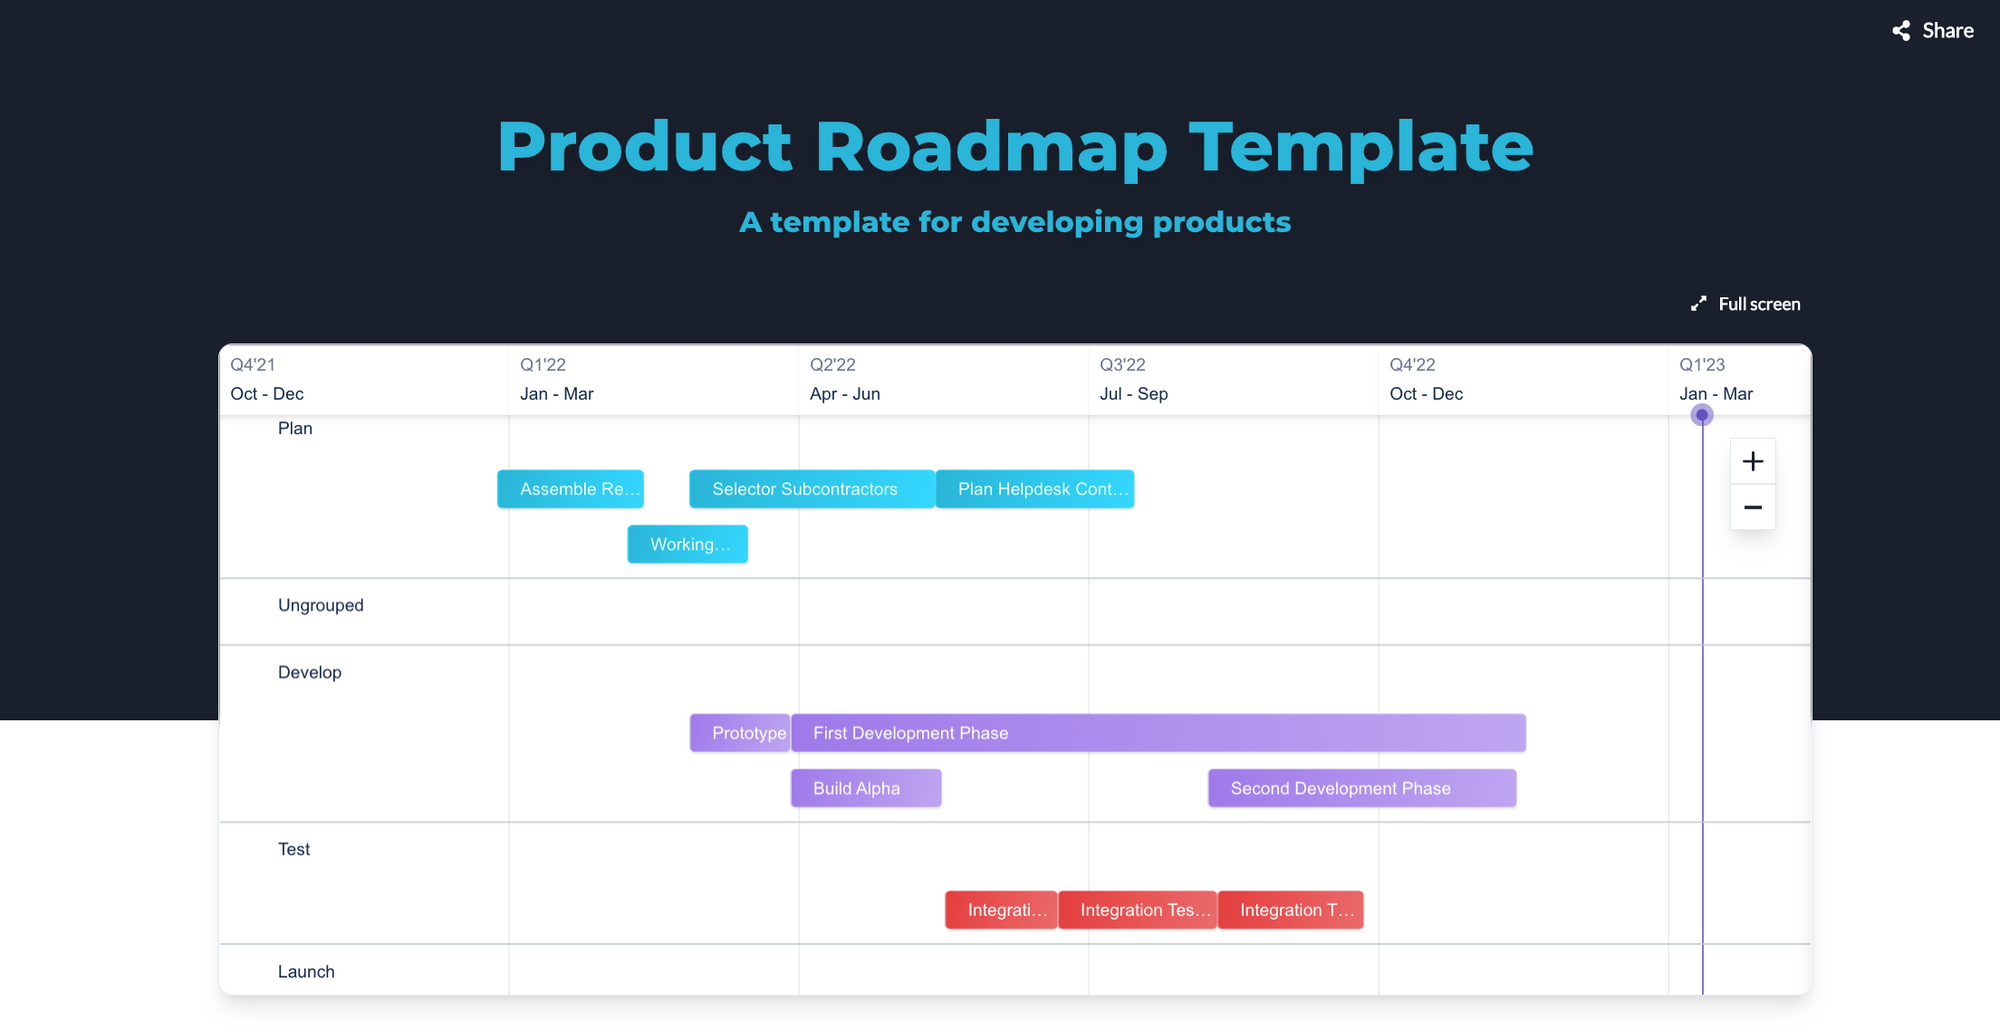 Free product marketing strategy roadmap templates on Goos.ly